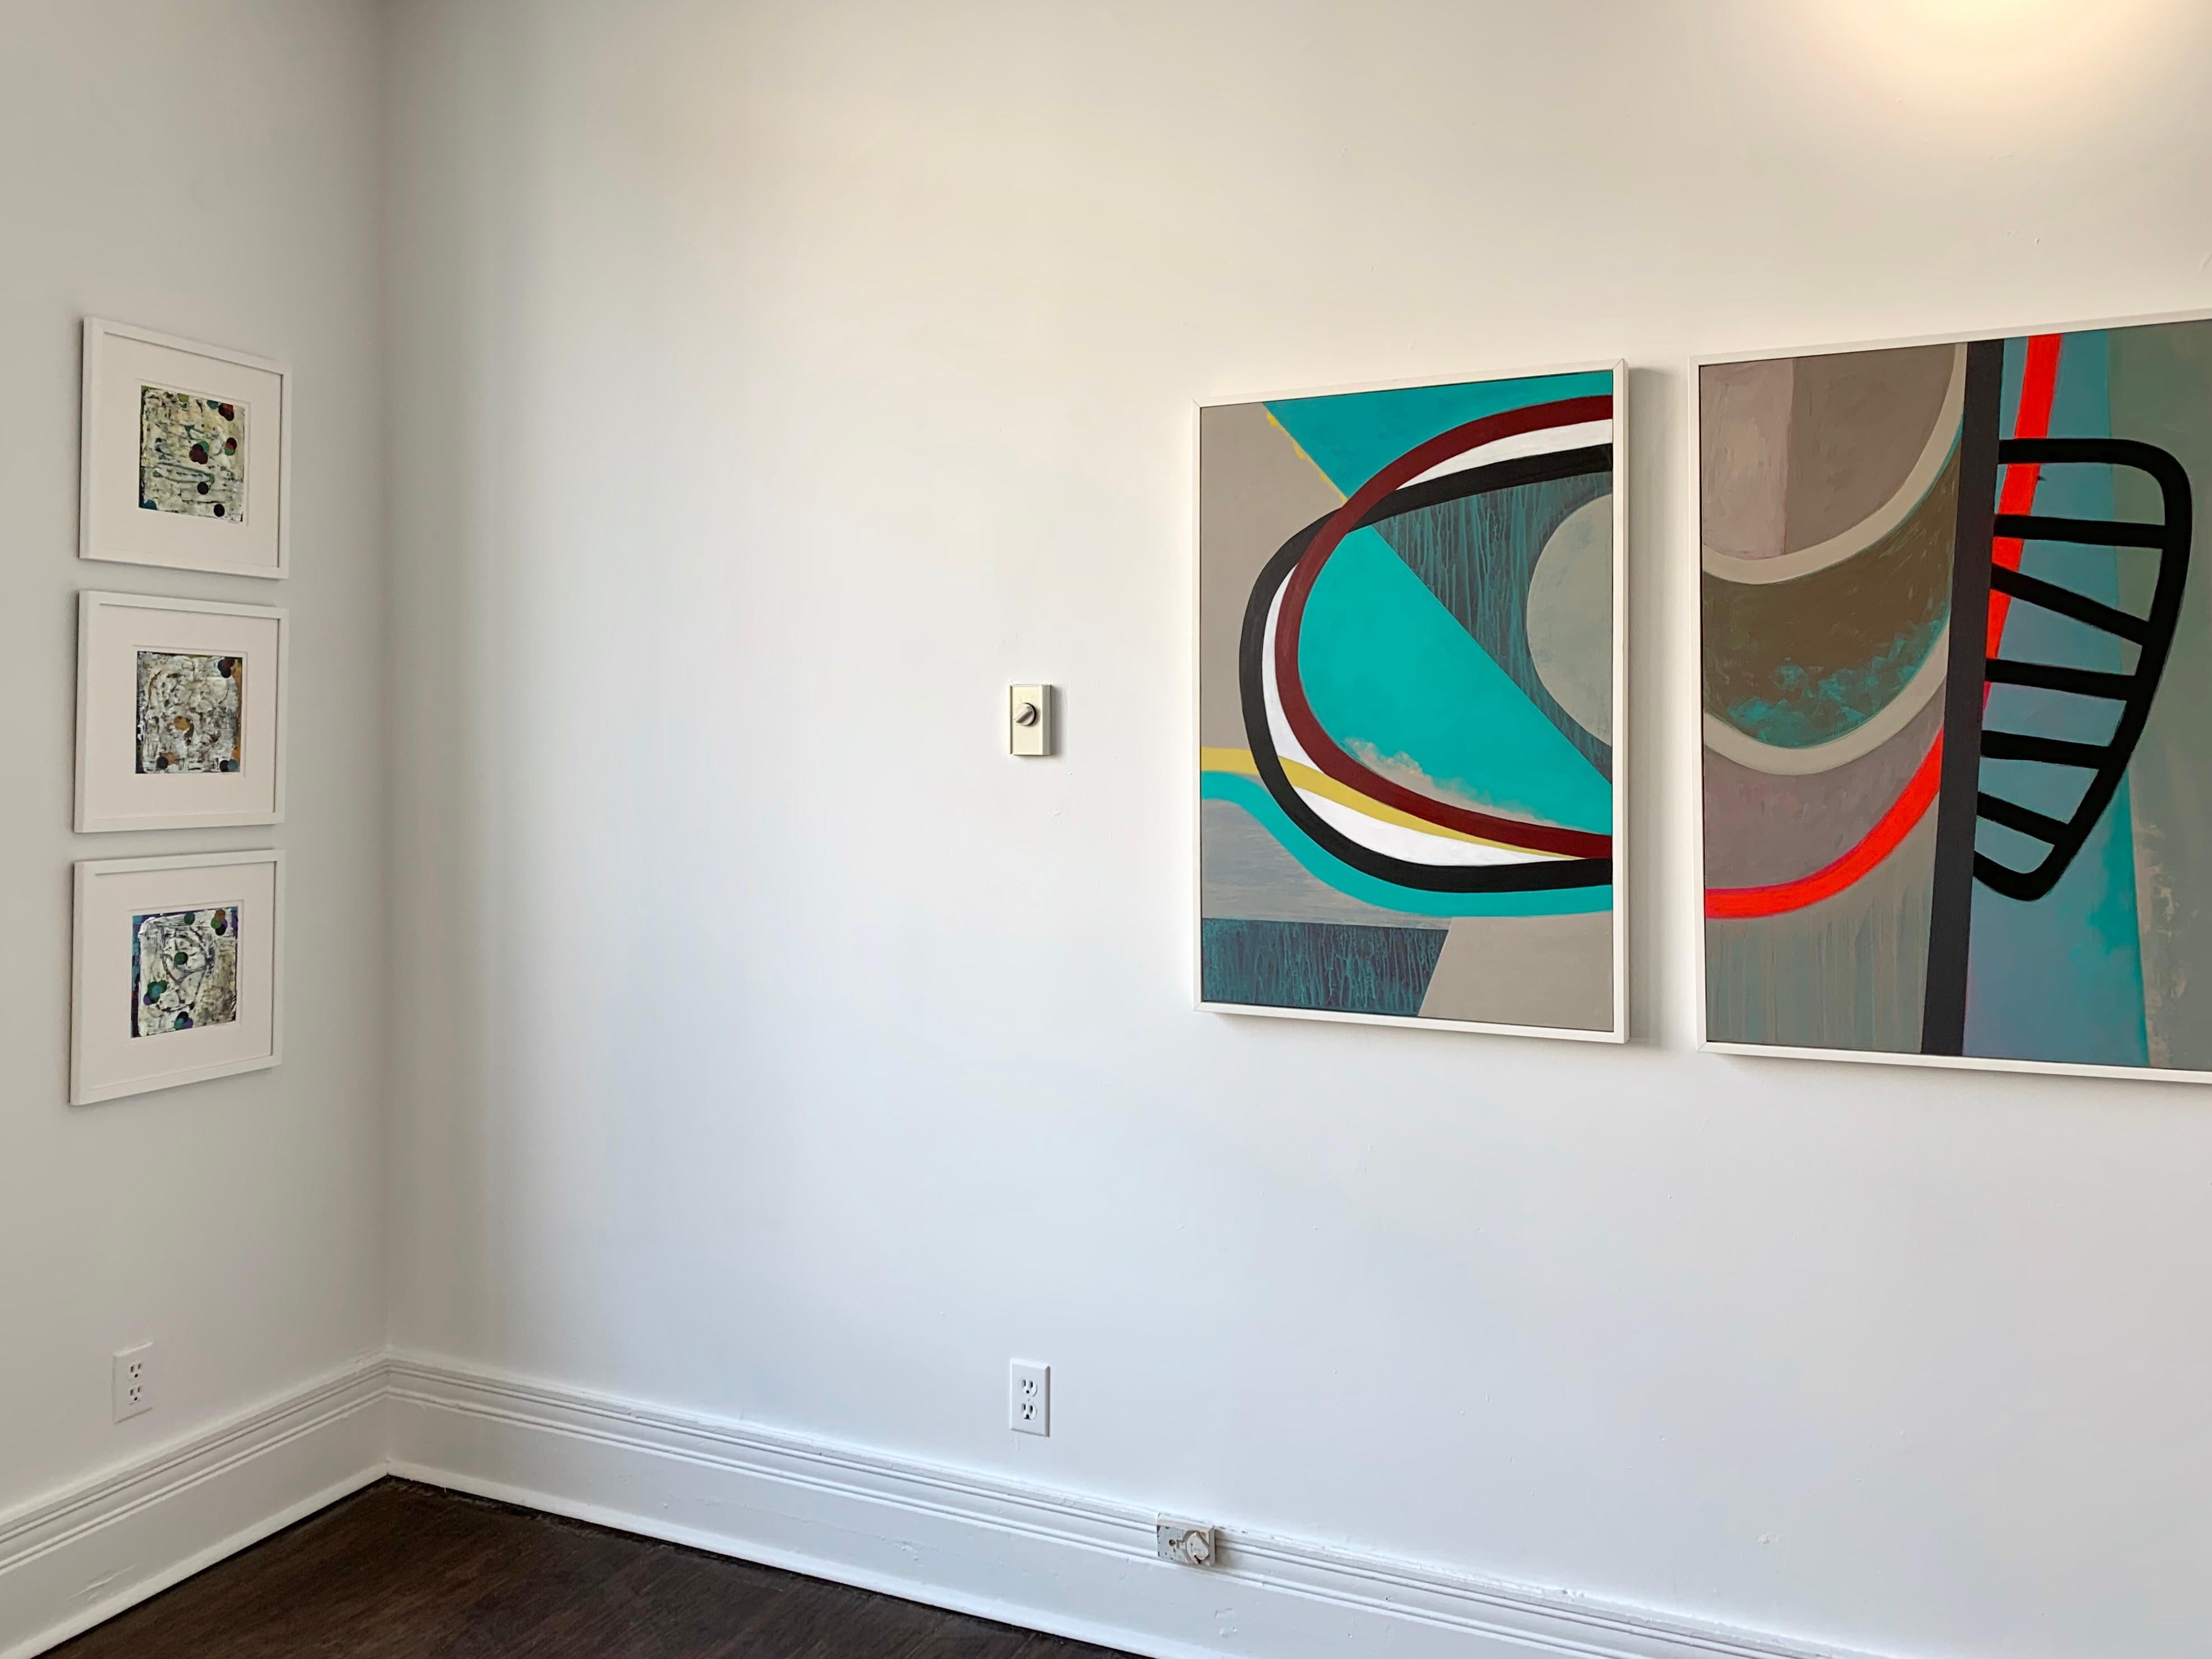 Liane Ricci’s abstract paintings defy categorization. They are based in geometry and largely composed of bold lines dissecting and running alongside shapes, yet there is nothing linear or analytical about them. A lyricism and feminine grace permeate